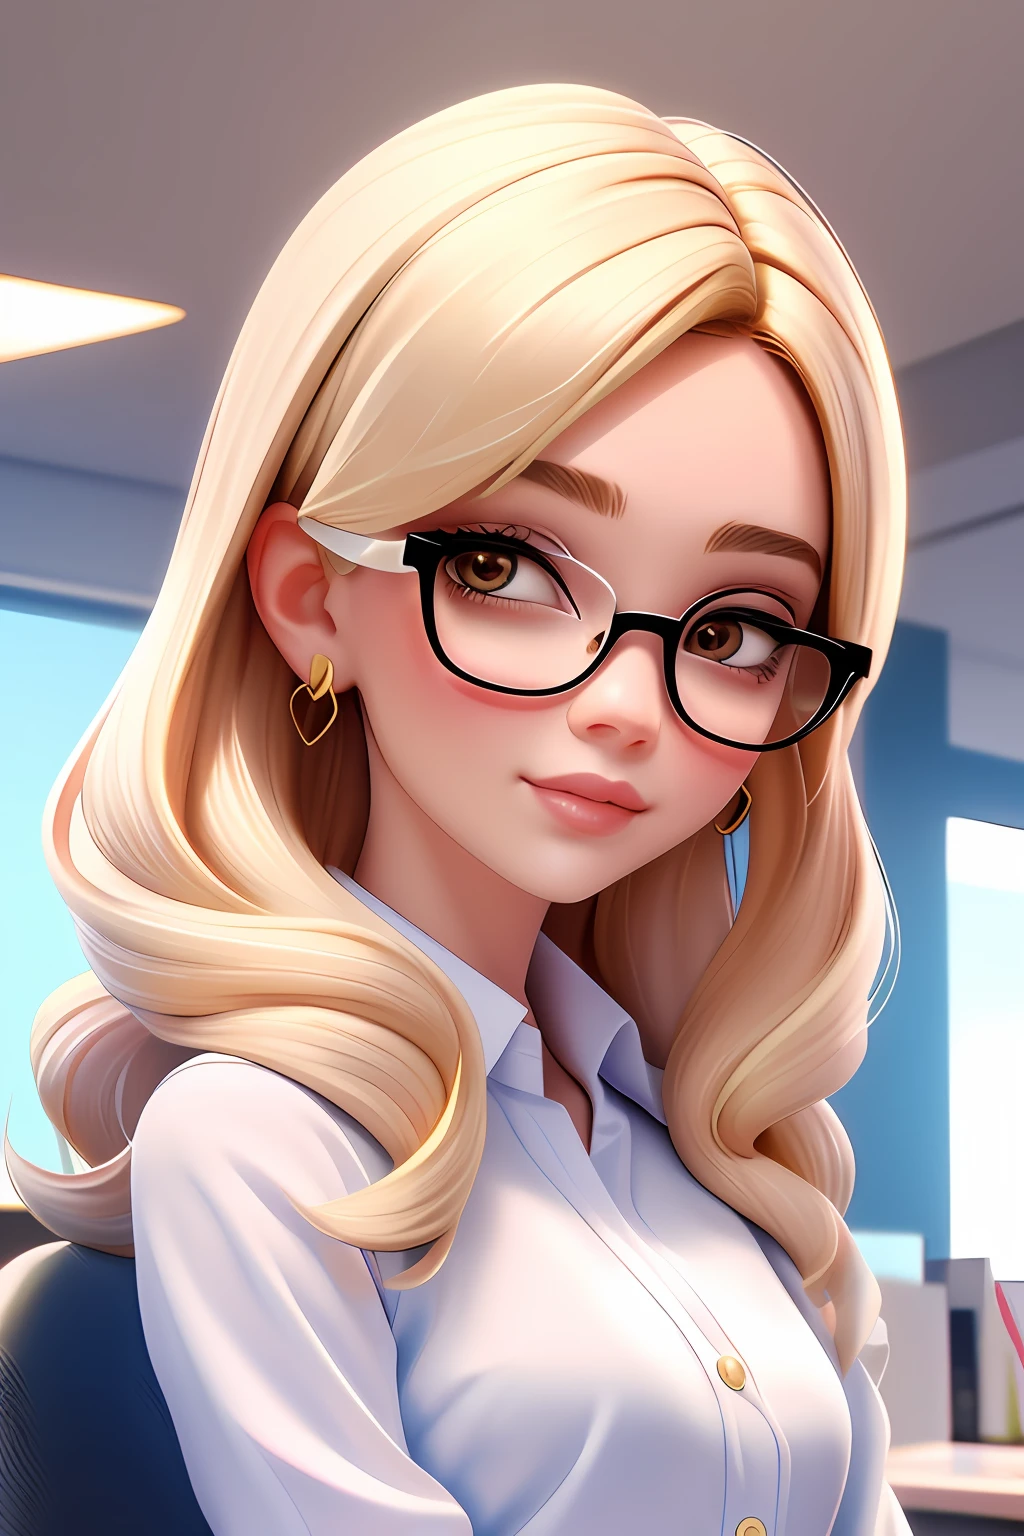 1 , adult  woman, freckles, hazelnut eyes, (fully body: 1.2), simple background, Masterpiece artwork, best qualityer, (gradient background) Happy blonde hair, pastel hues, shorth hair, light blonde, working in an office, executive, intellectual